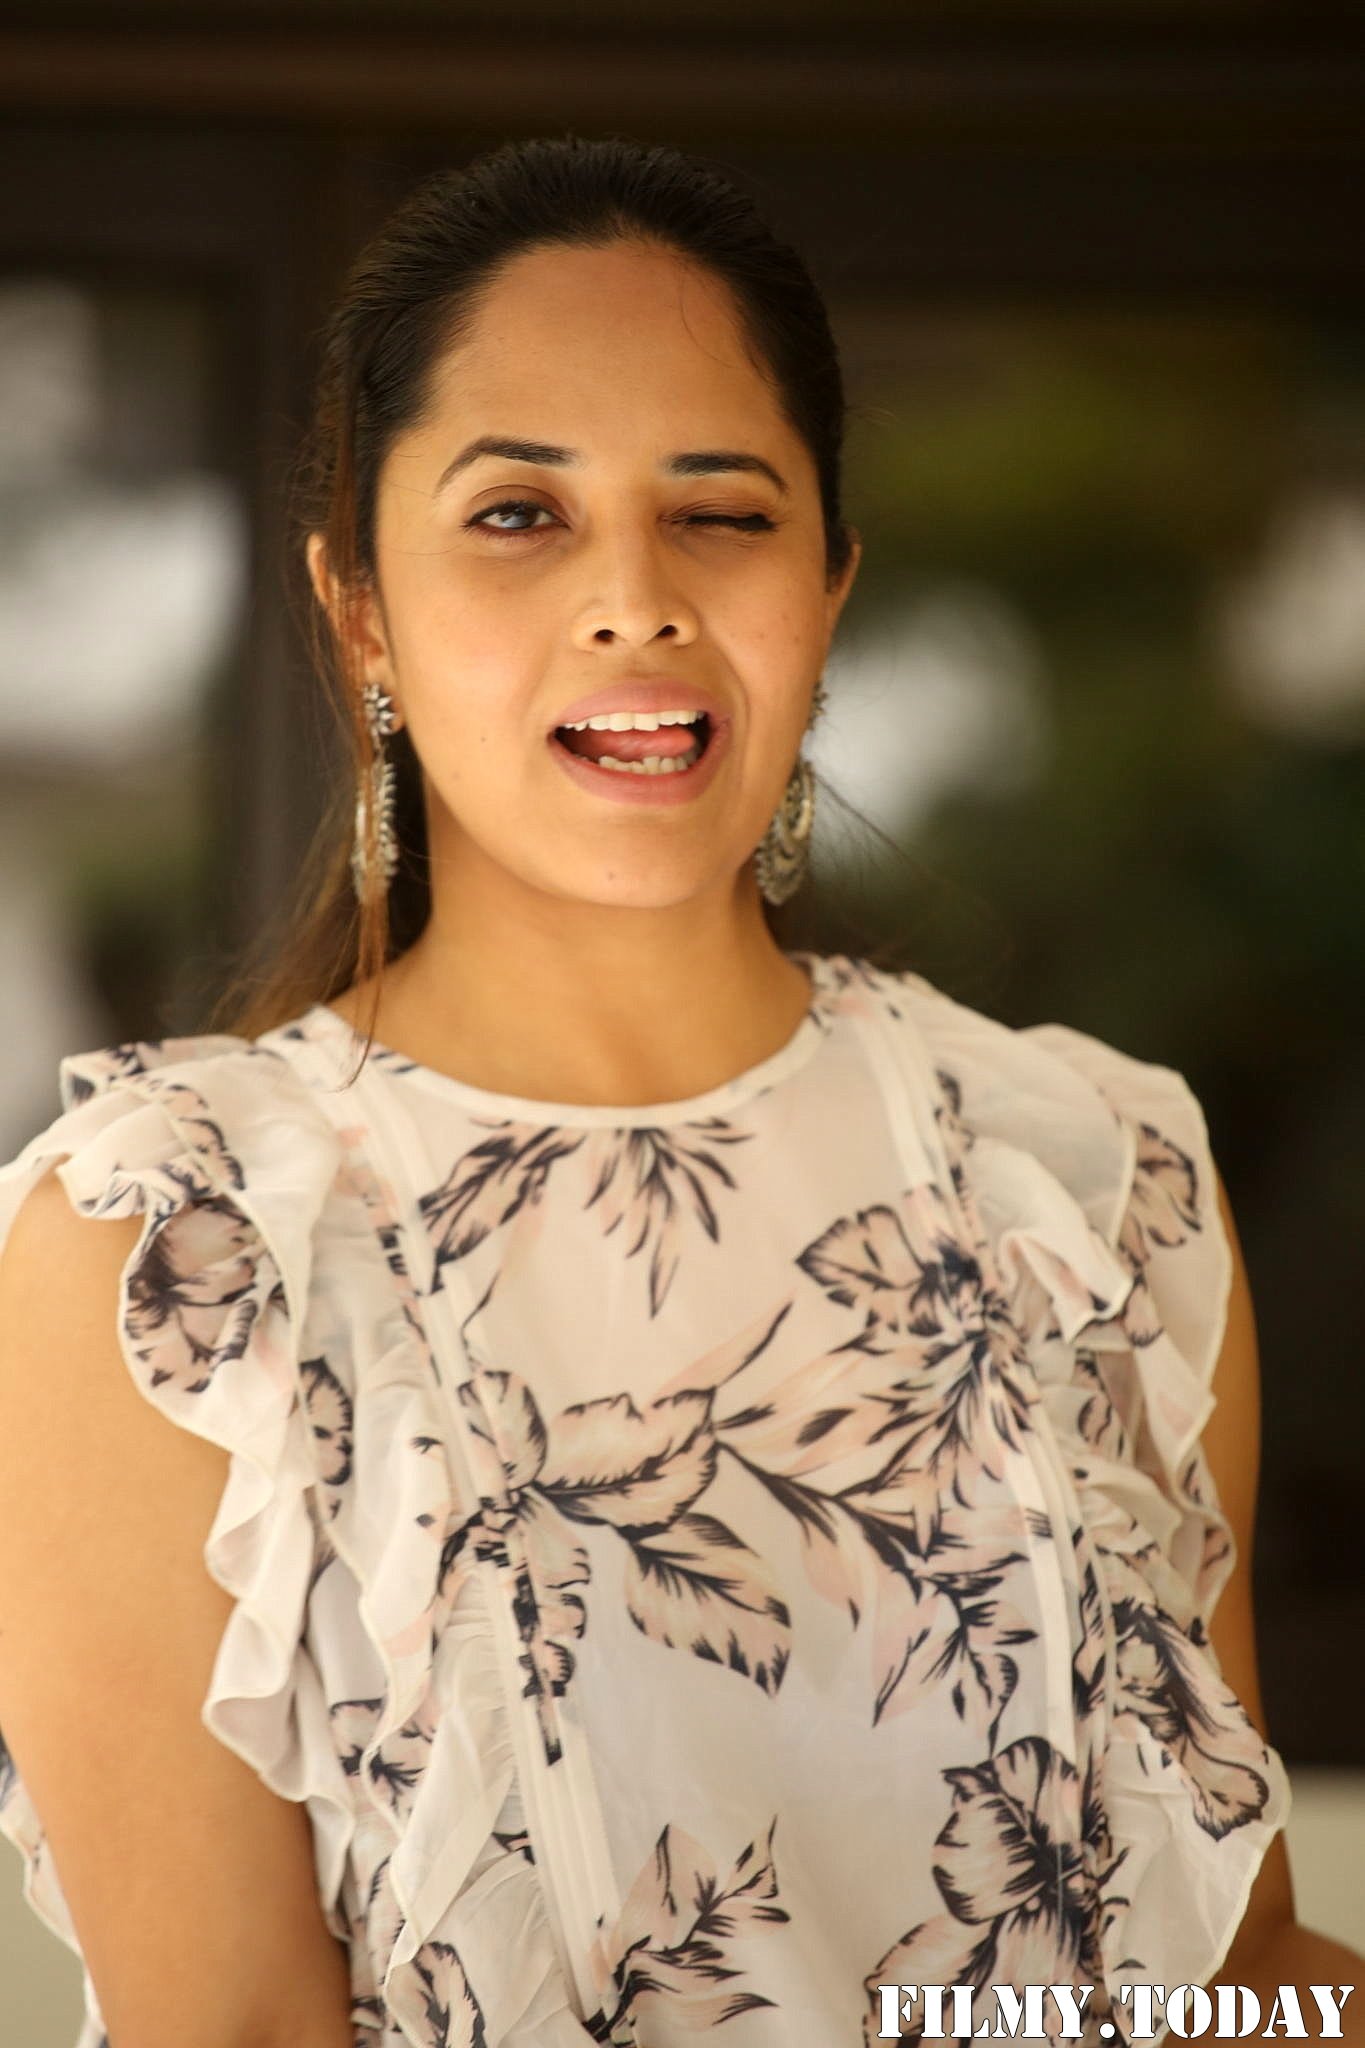 Interview With Kathanam Actress Anasuya Photos | Picture 1673758